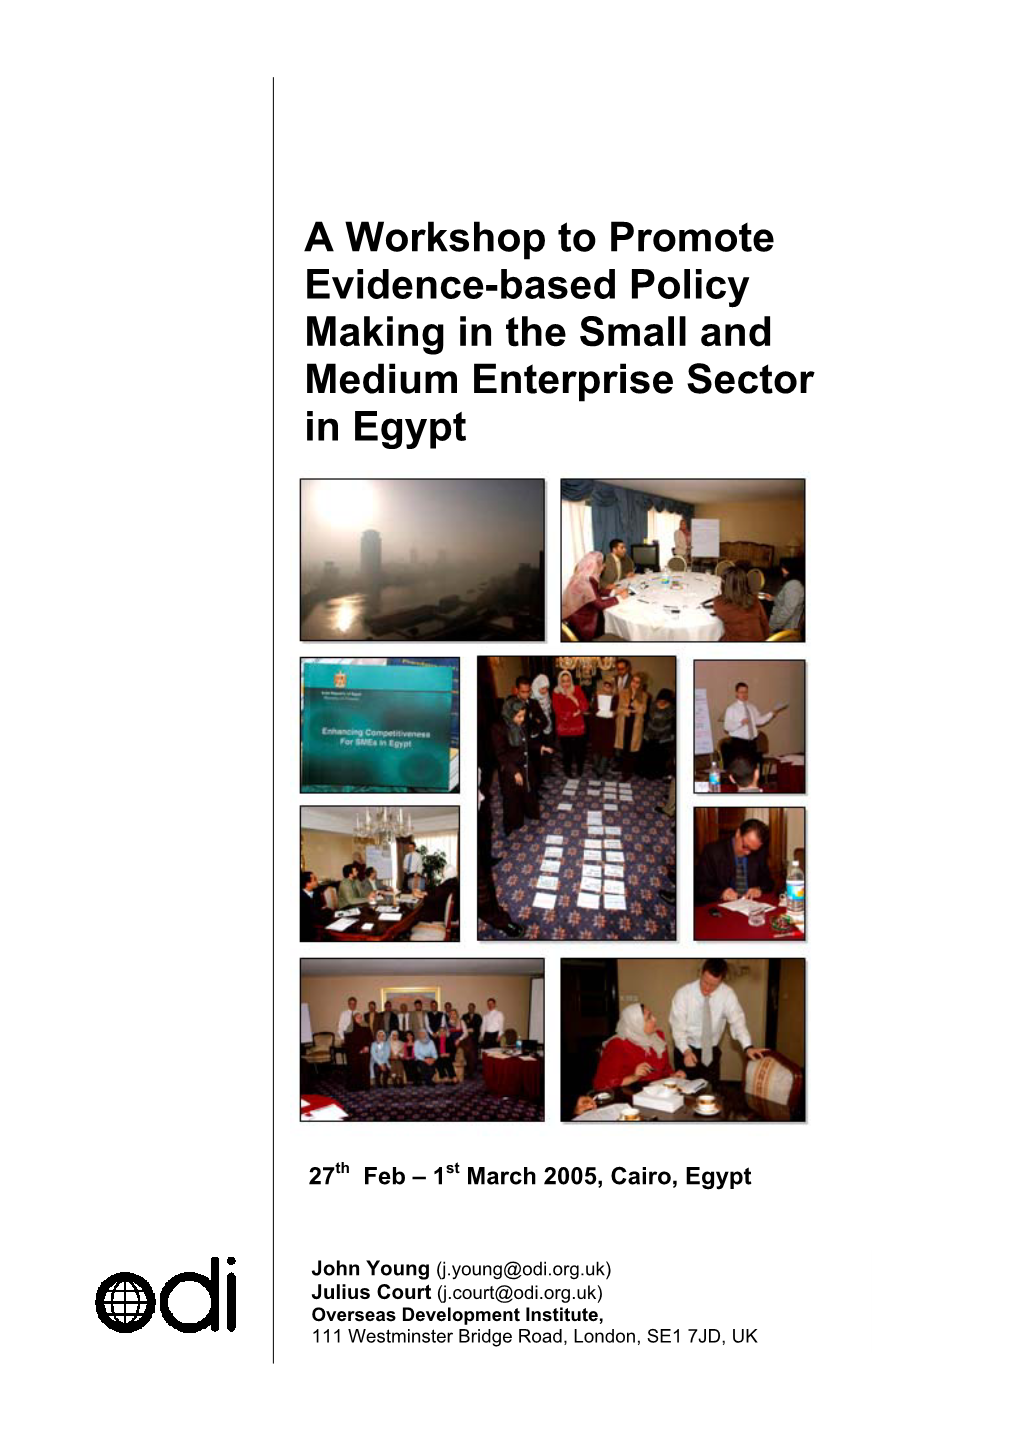 A Workshop to Promote Evidence-Based Policy Making in the Small and Medium Enterprise Sector in Egypt